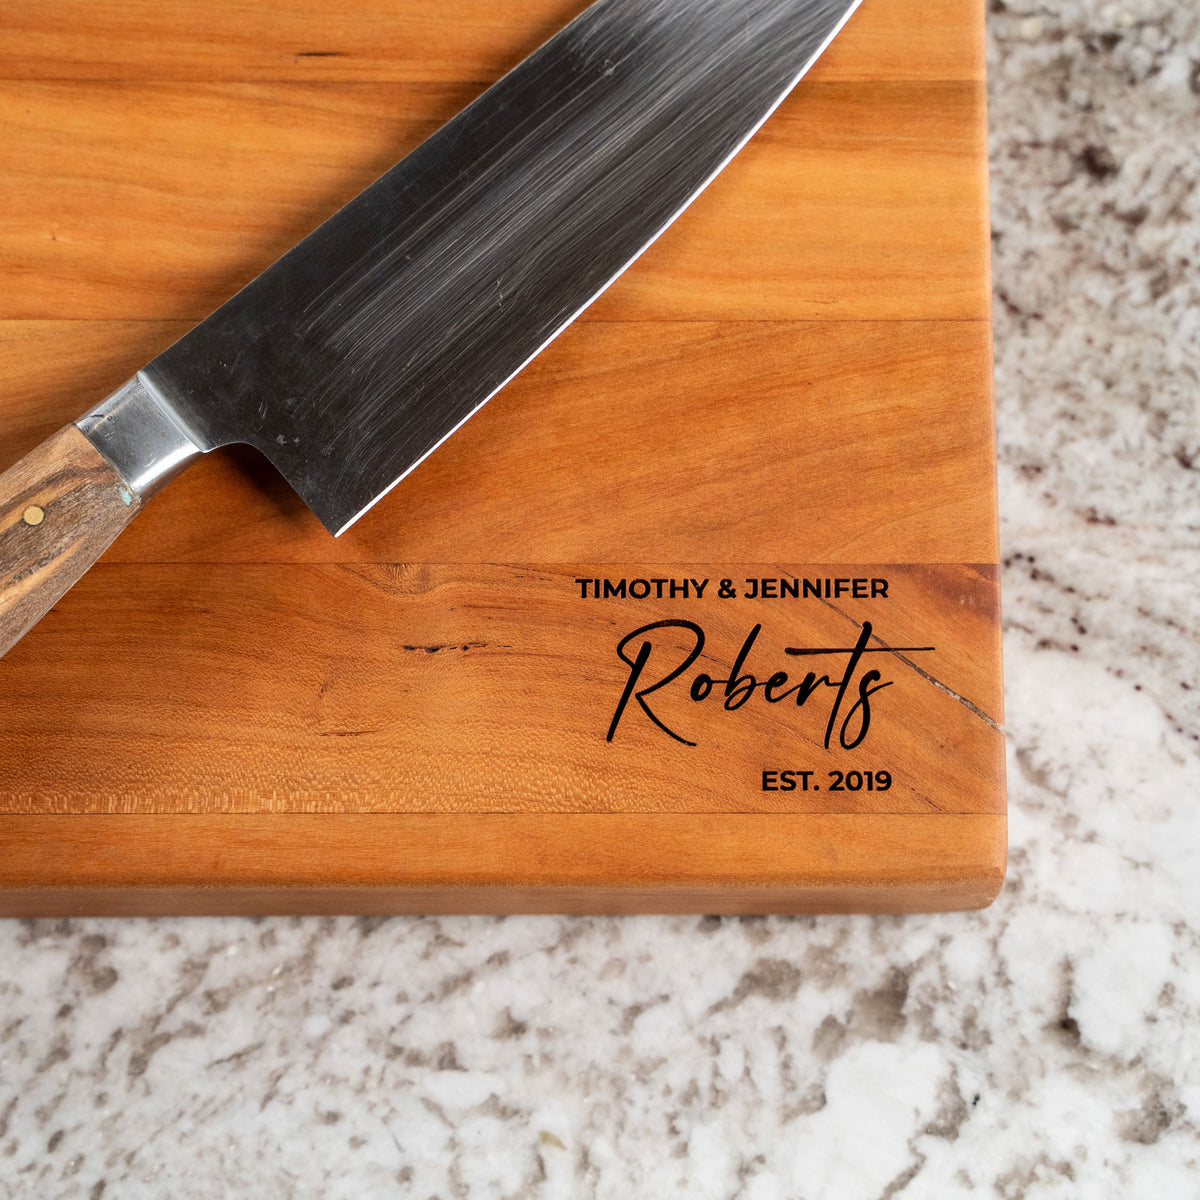 American Cherry Wood Butcher Block Cutting Board, Small - 13.5in x 13.5in / Remove Handles (-$5.00)at Holtz Leather